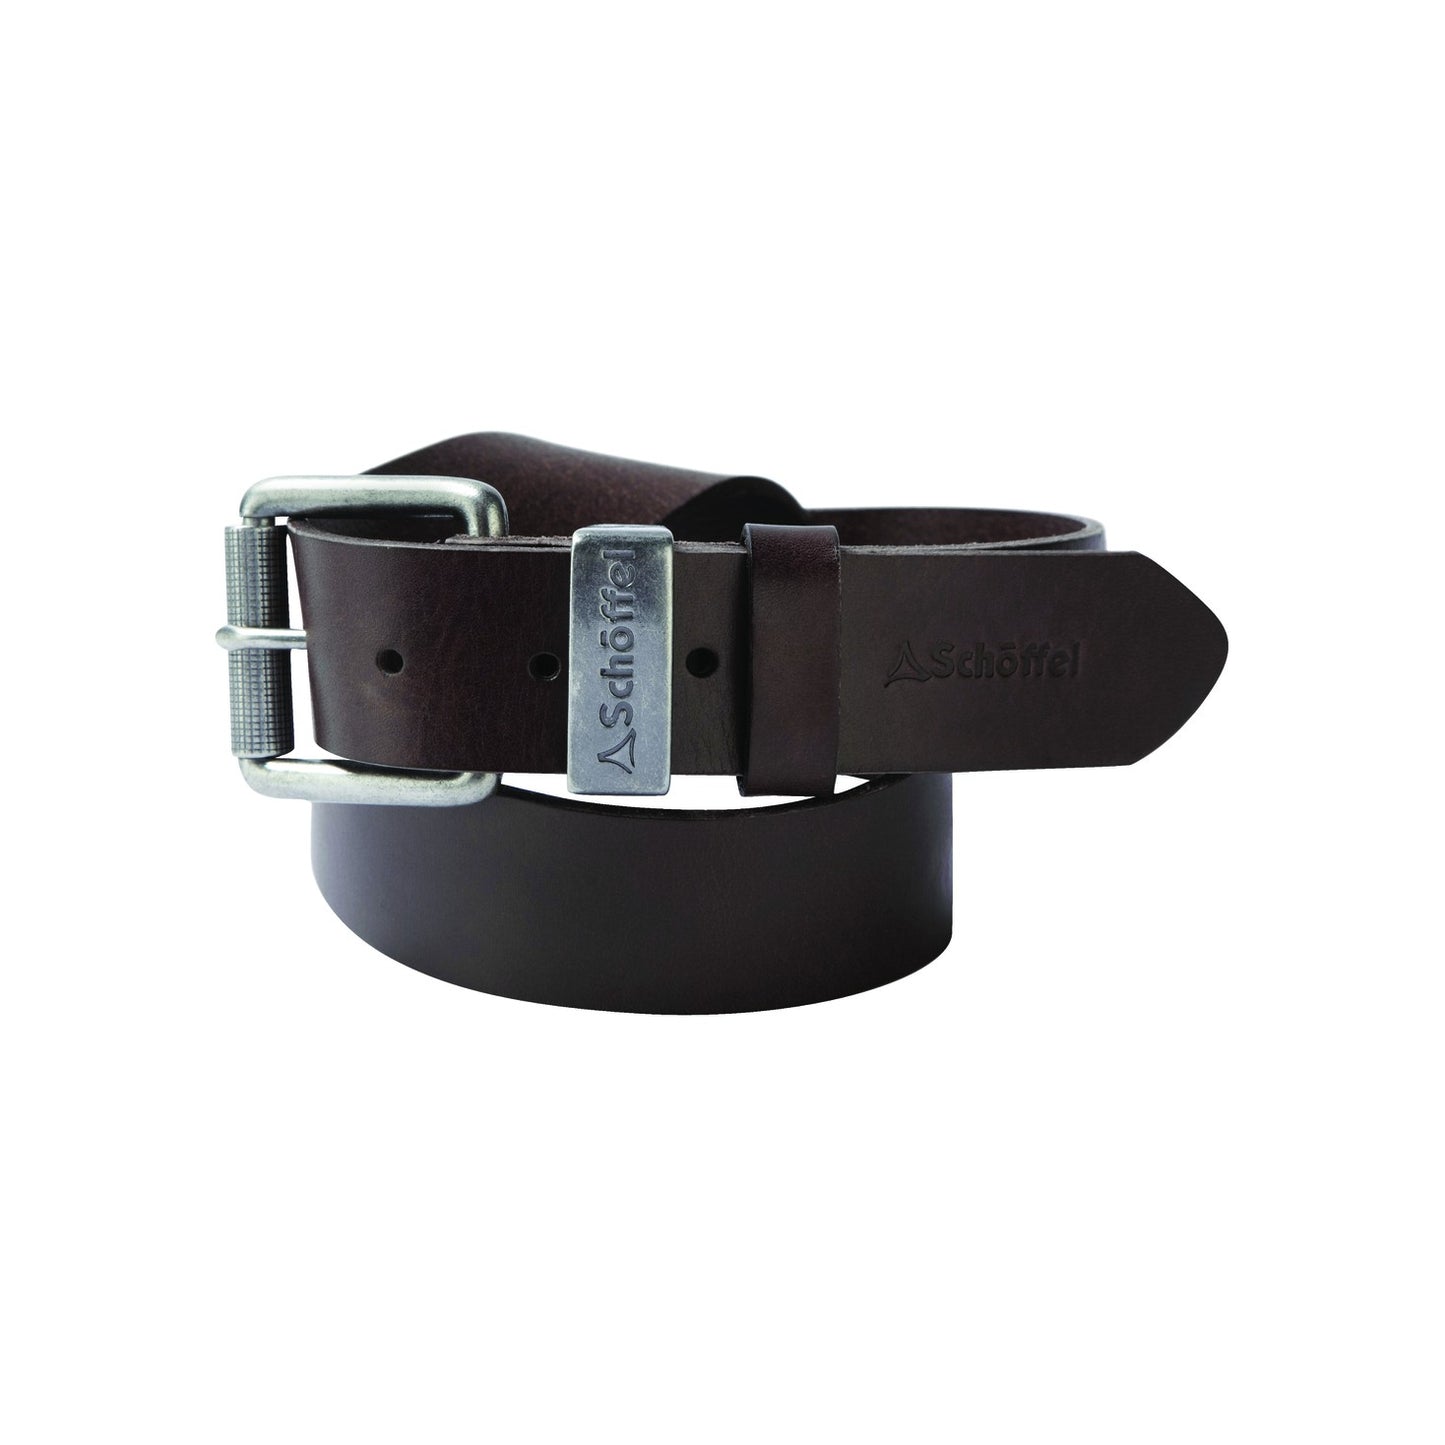 Schoffel Accessories, the Leather Belt